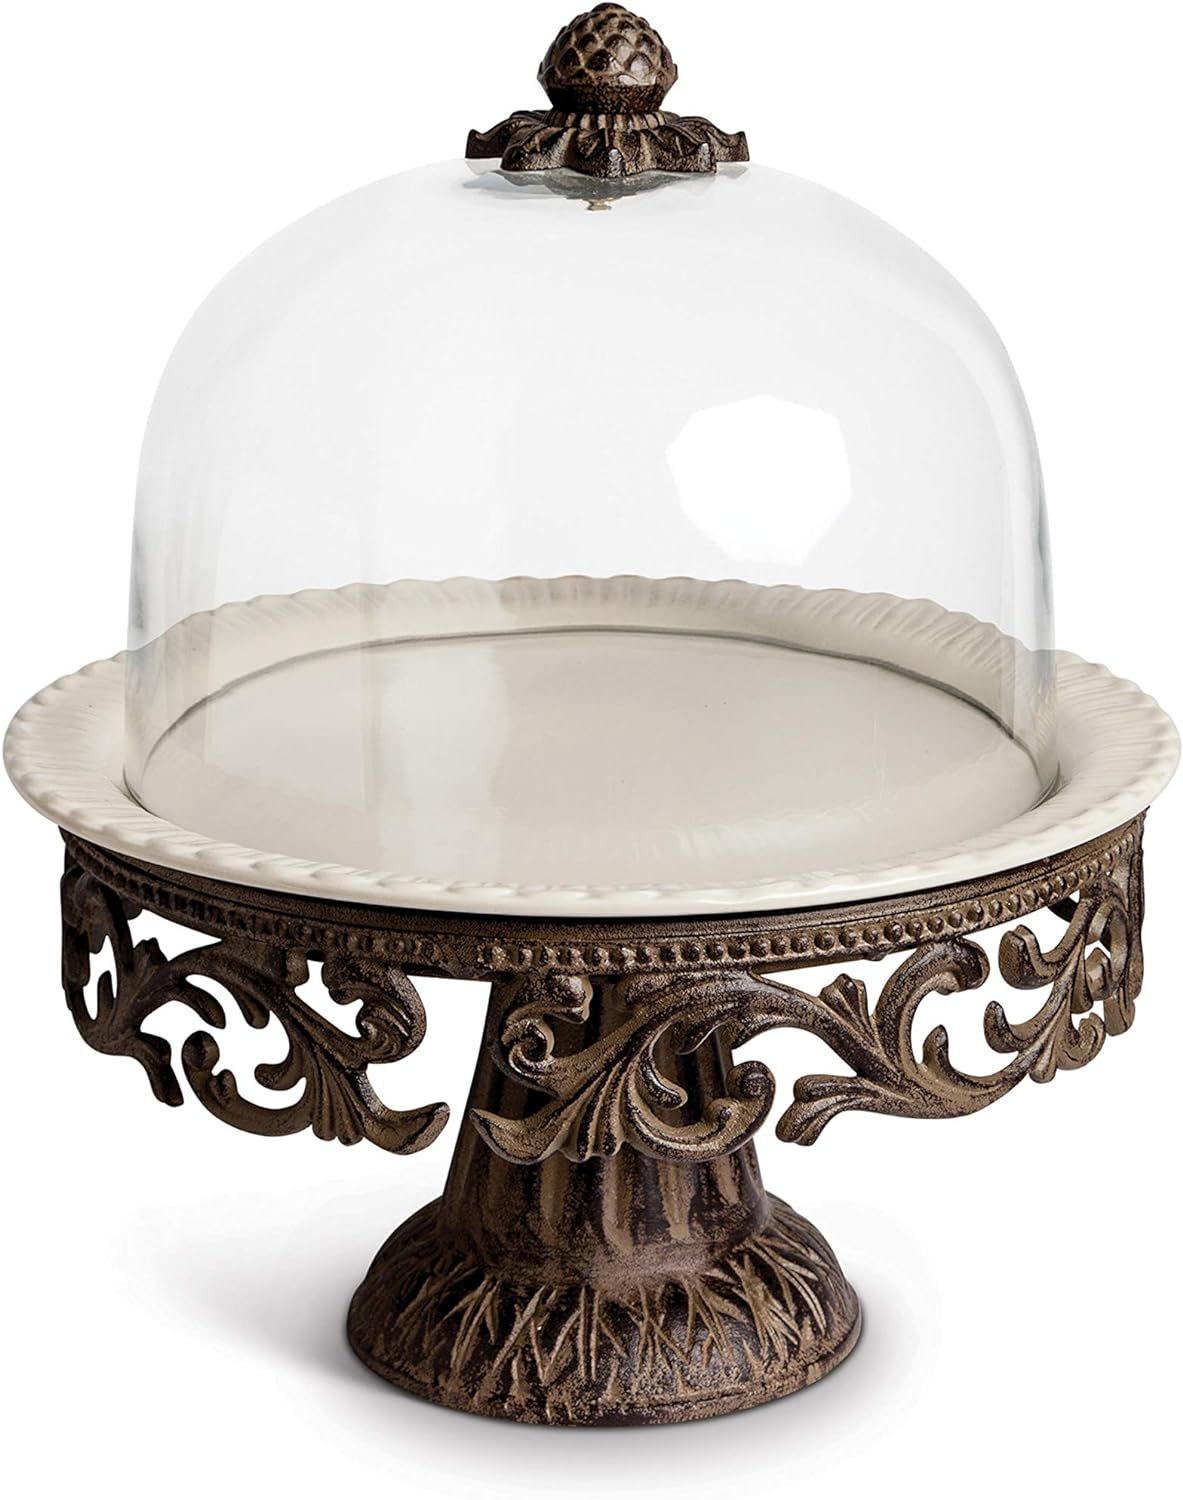 Glass Domed Cake Pedestal With Acanthus Leaf Ornate Brown Metal Base and Cream Ceramic Plate | Amazon (US)